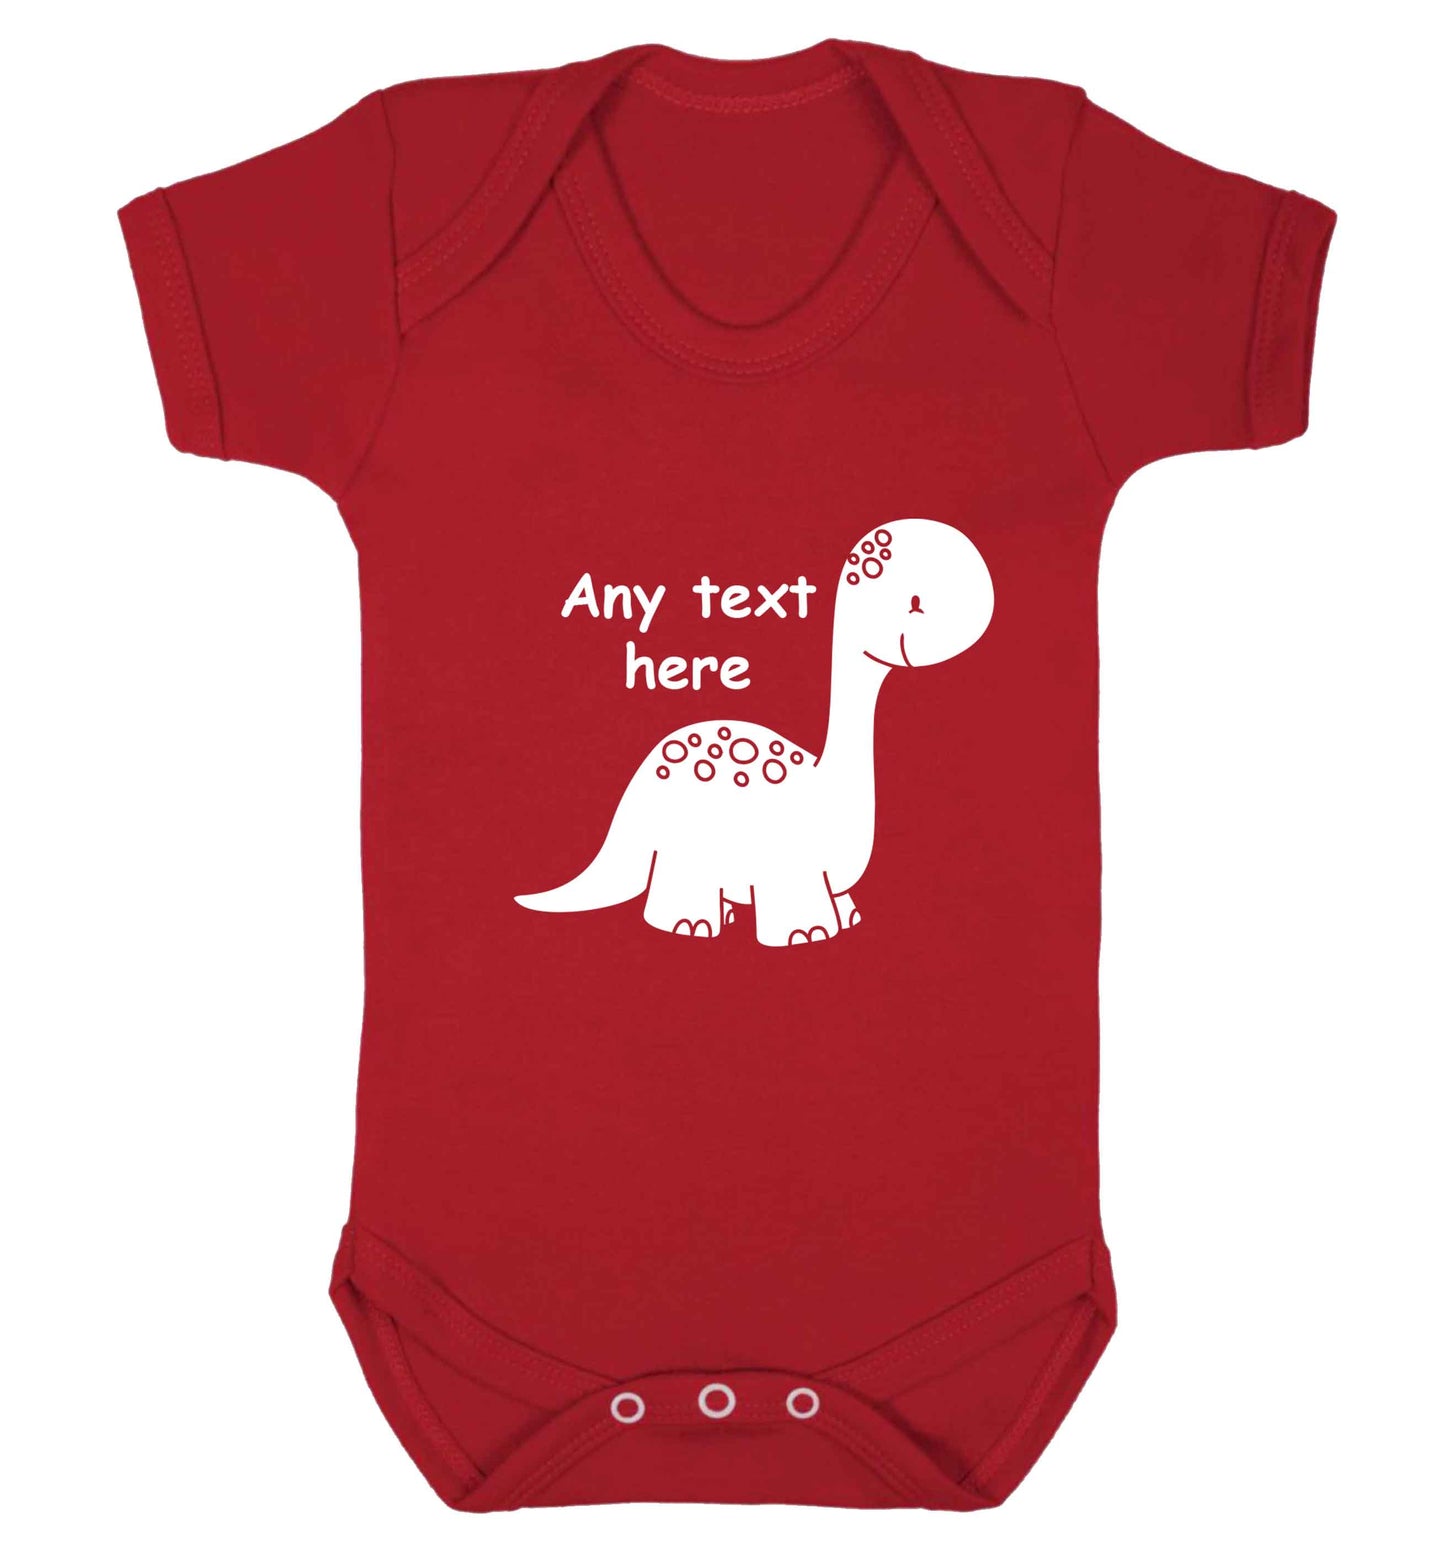 Dinosaur any text baby vest red 18-24 months